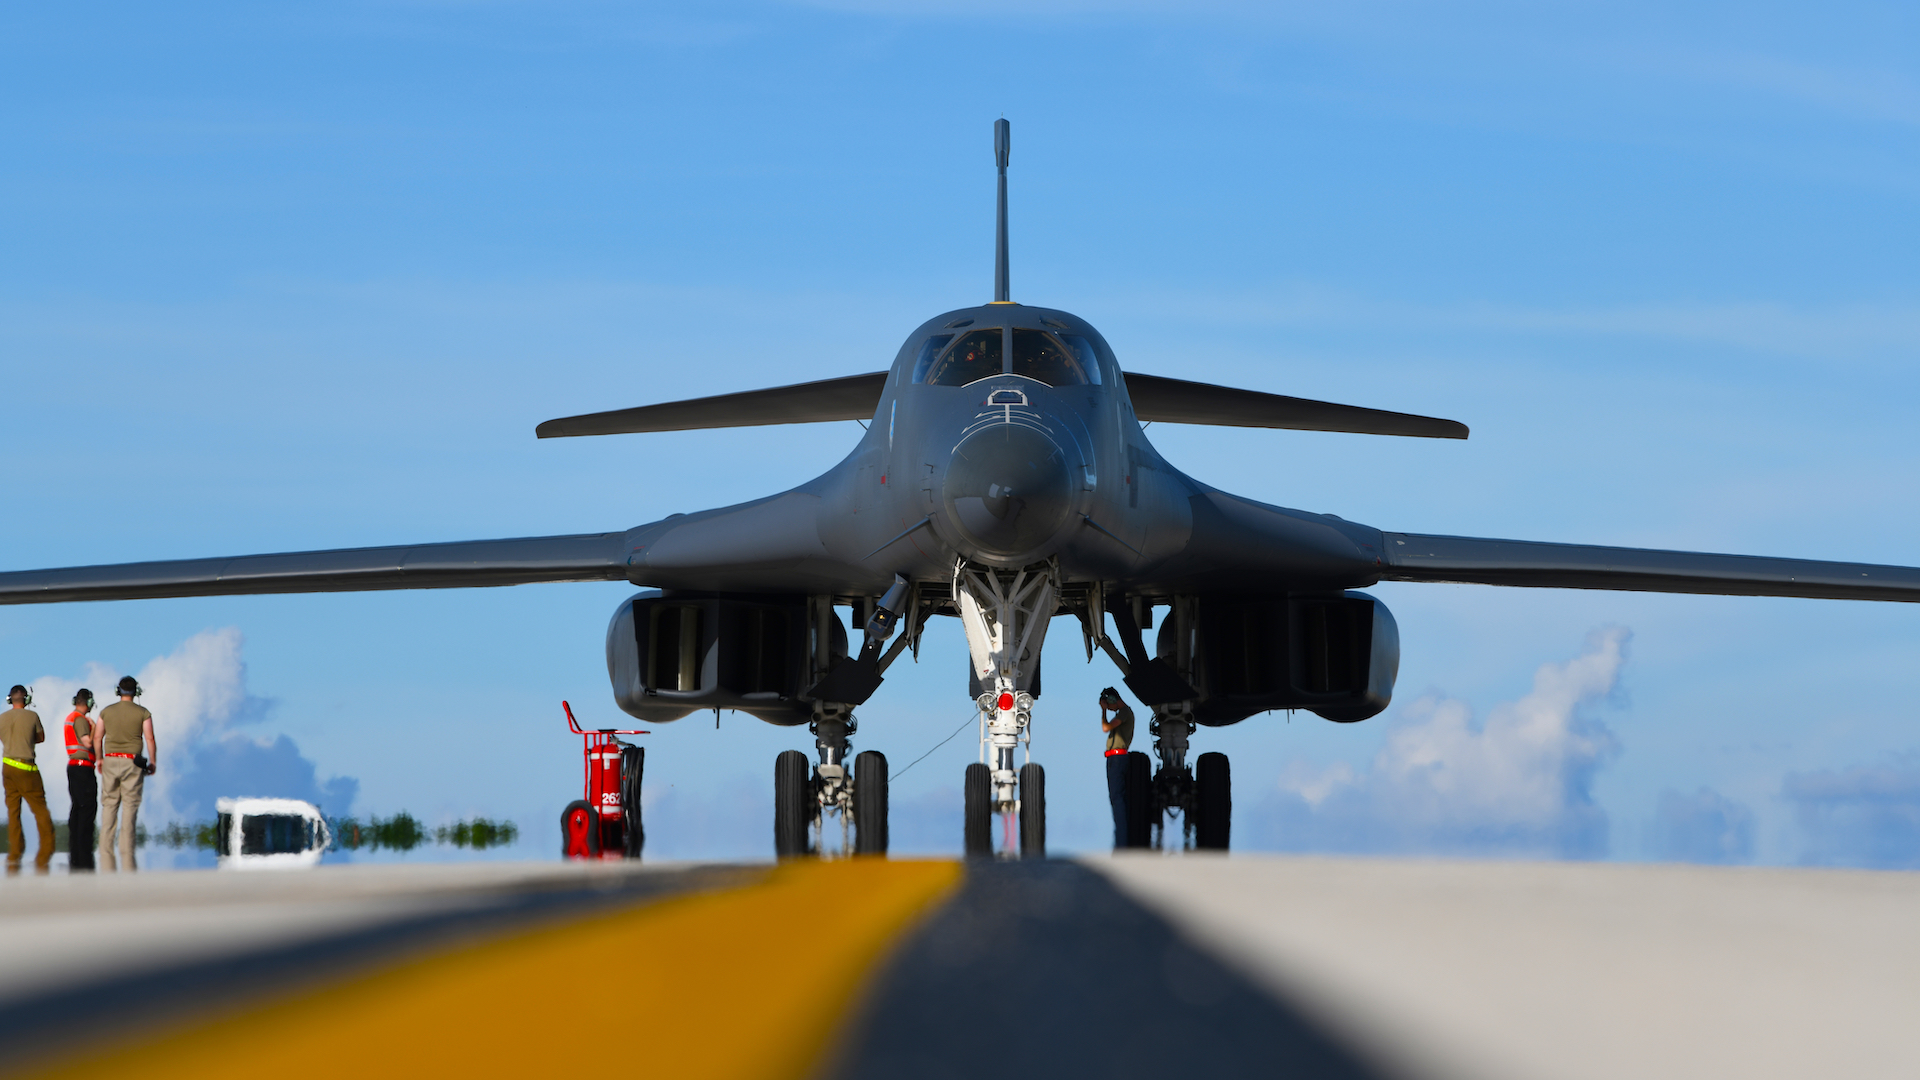 Air Force B-1B Lancer bombers arrive in Guam in message to adversaries